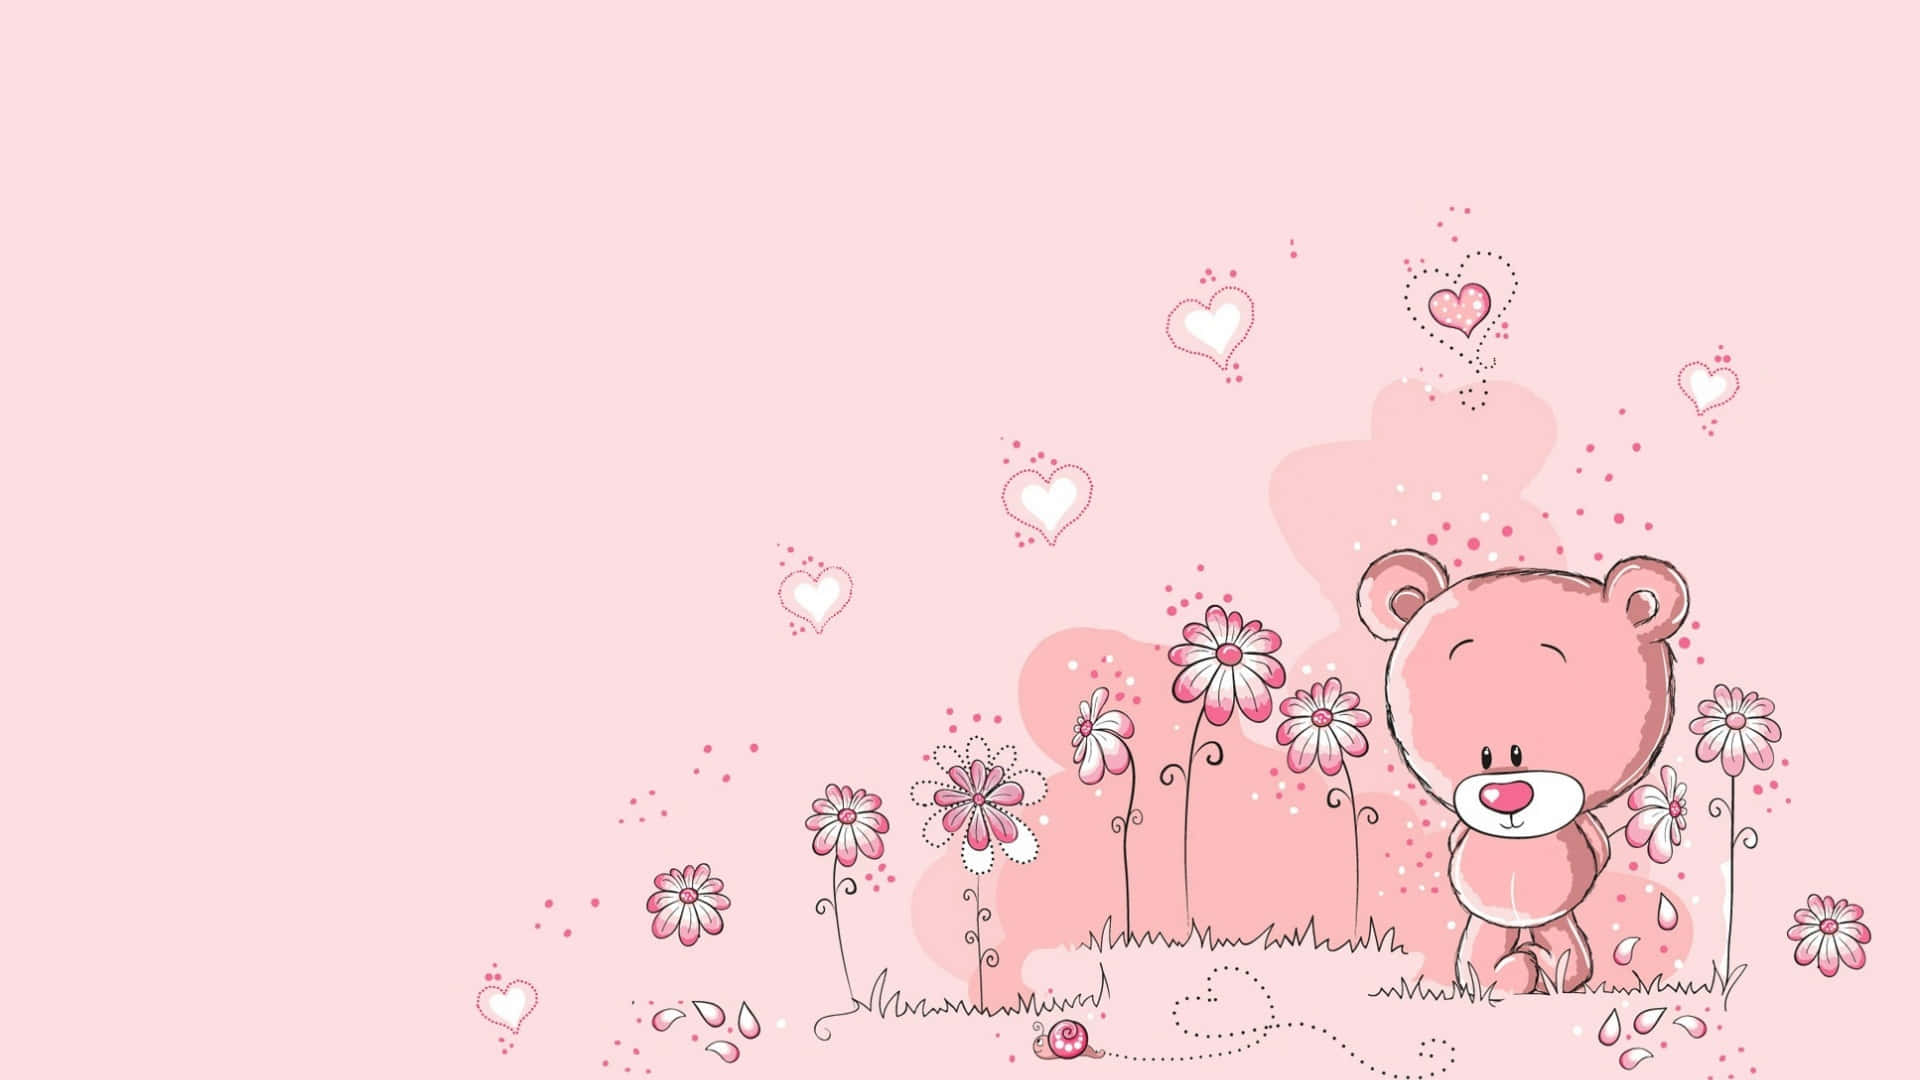 Customize Your Desktop With A Girly Theme